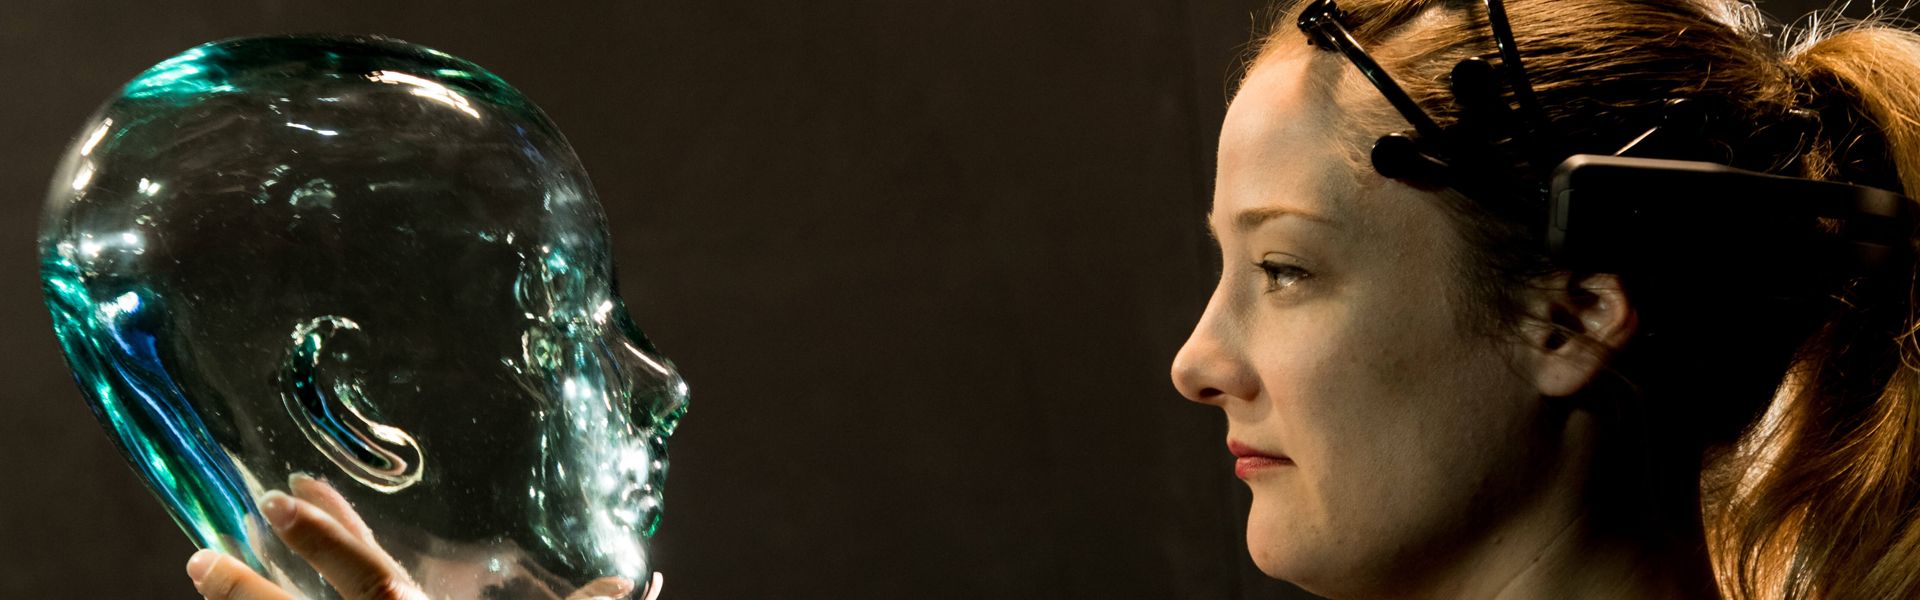 Woman holding a glass model of a human head